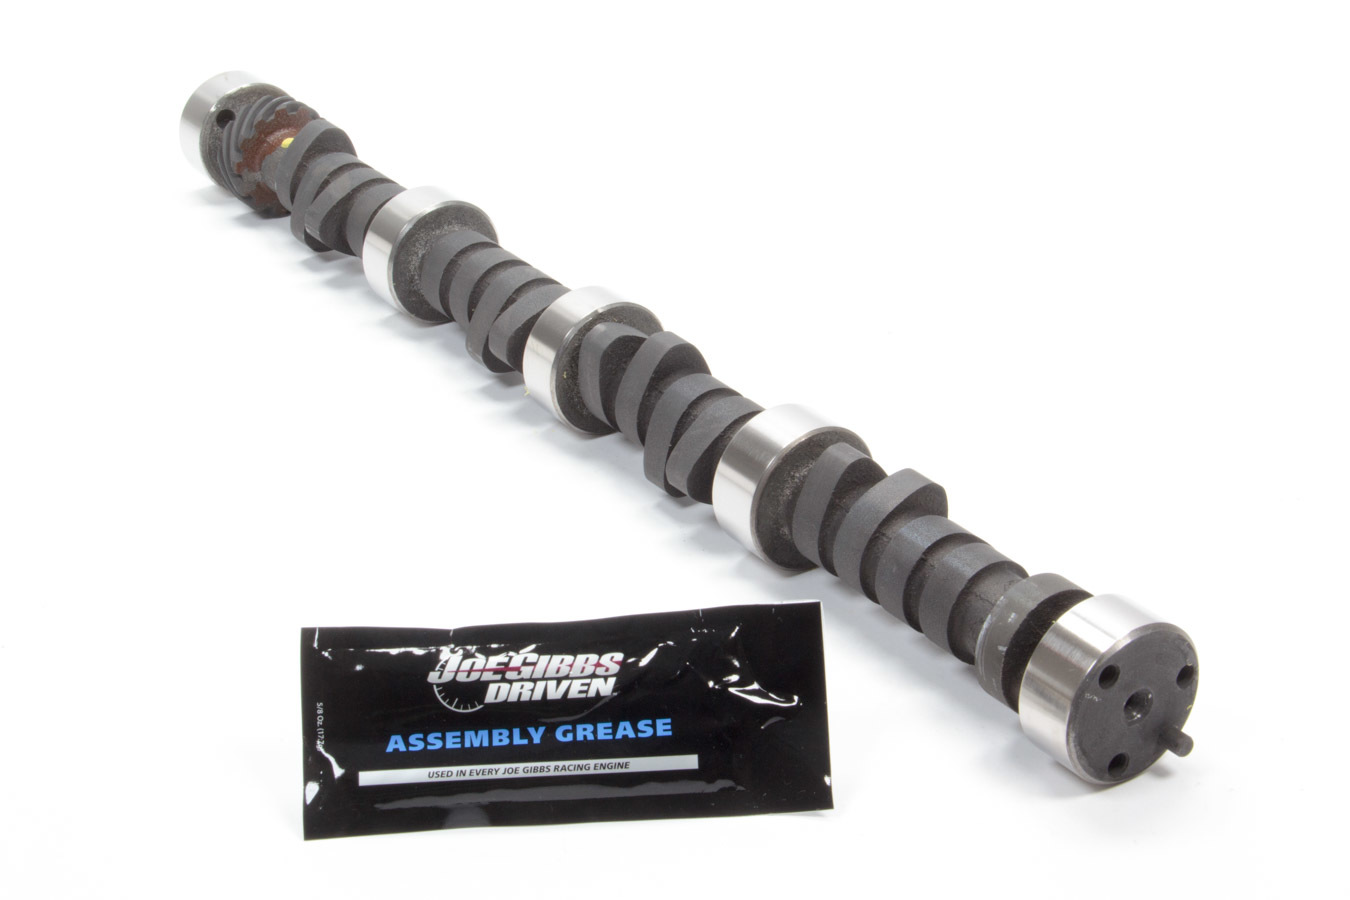 Howards Cams 111241-06 Camshaft, Oval Track Lift Rule, Hydraulic Flat Tappet, Lift 0.450 / 0.450 in, Duration 276 / 284, 106 LSA, 2600 / 6800 RPM, Small Block Chevy, Each